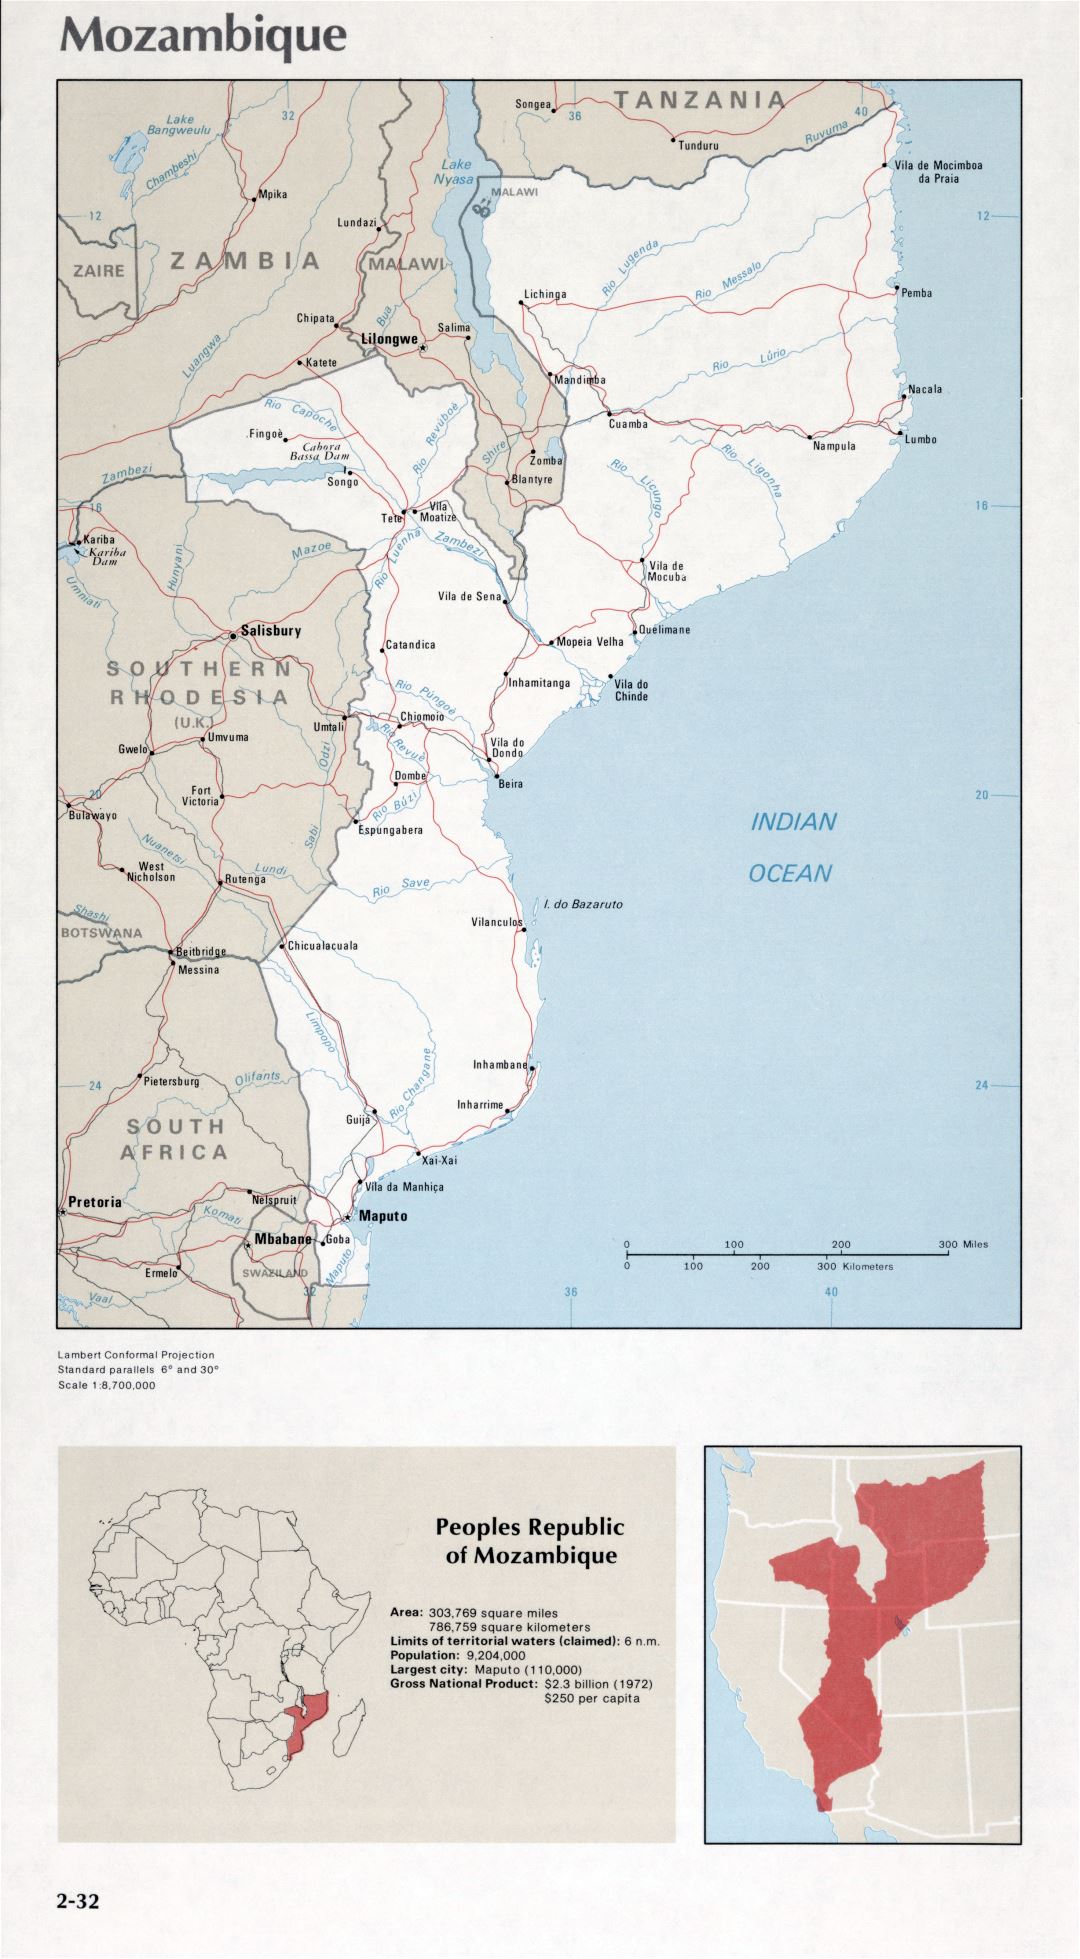 Map of Mozambique (2-32)